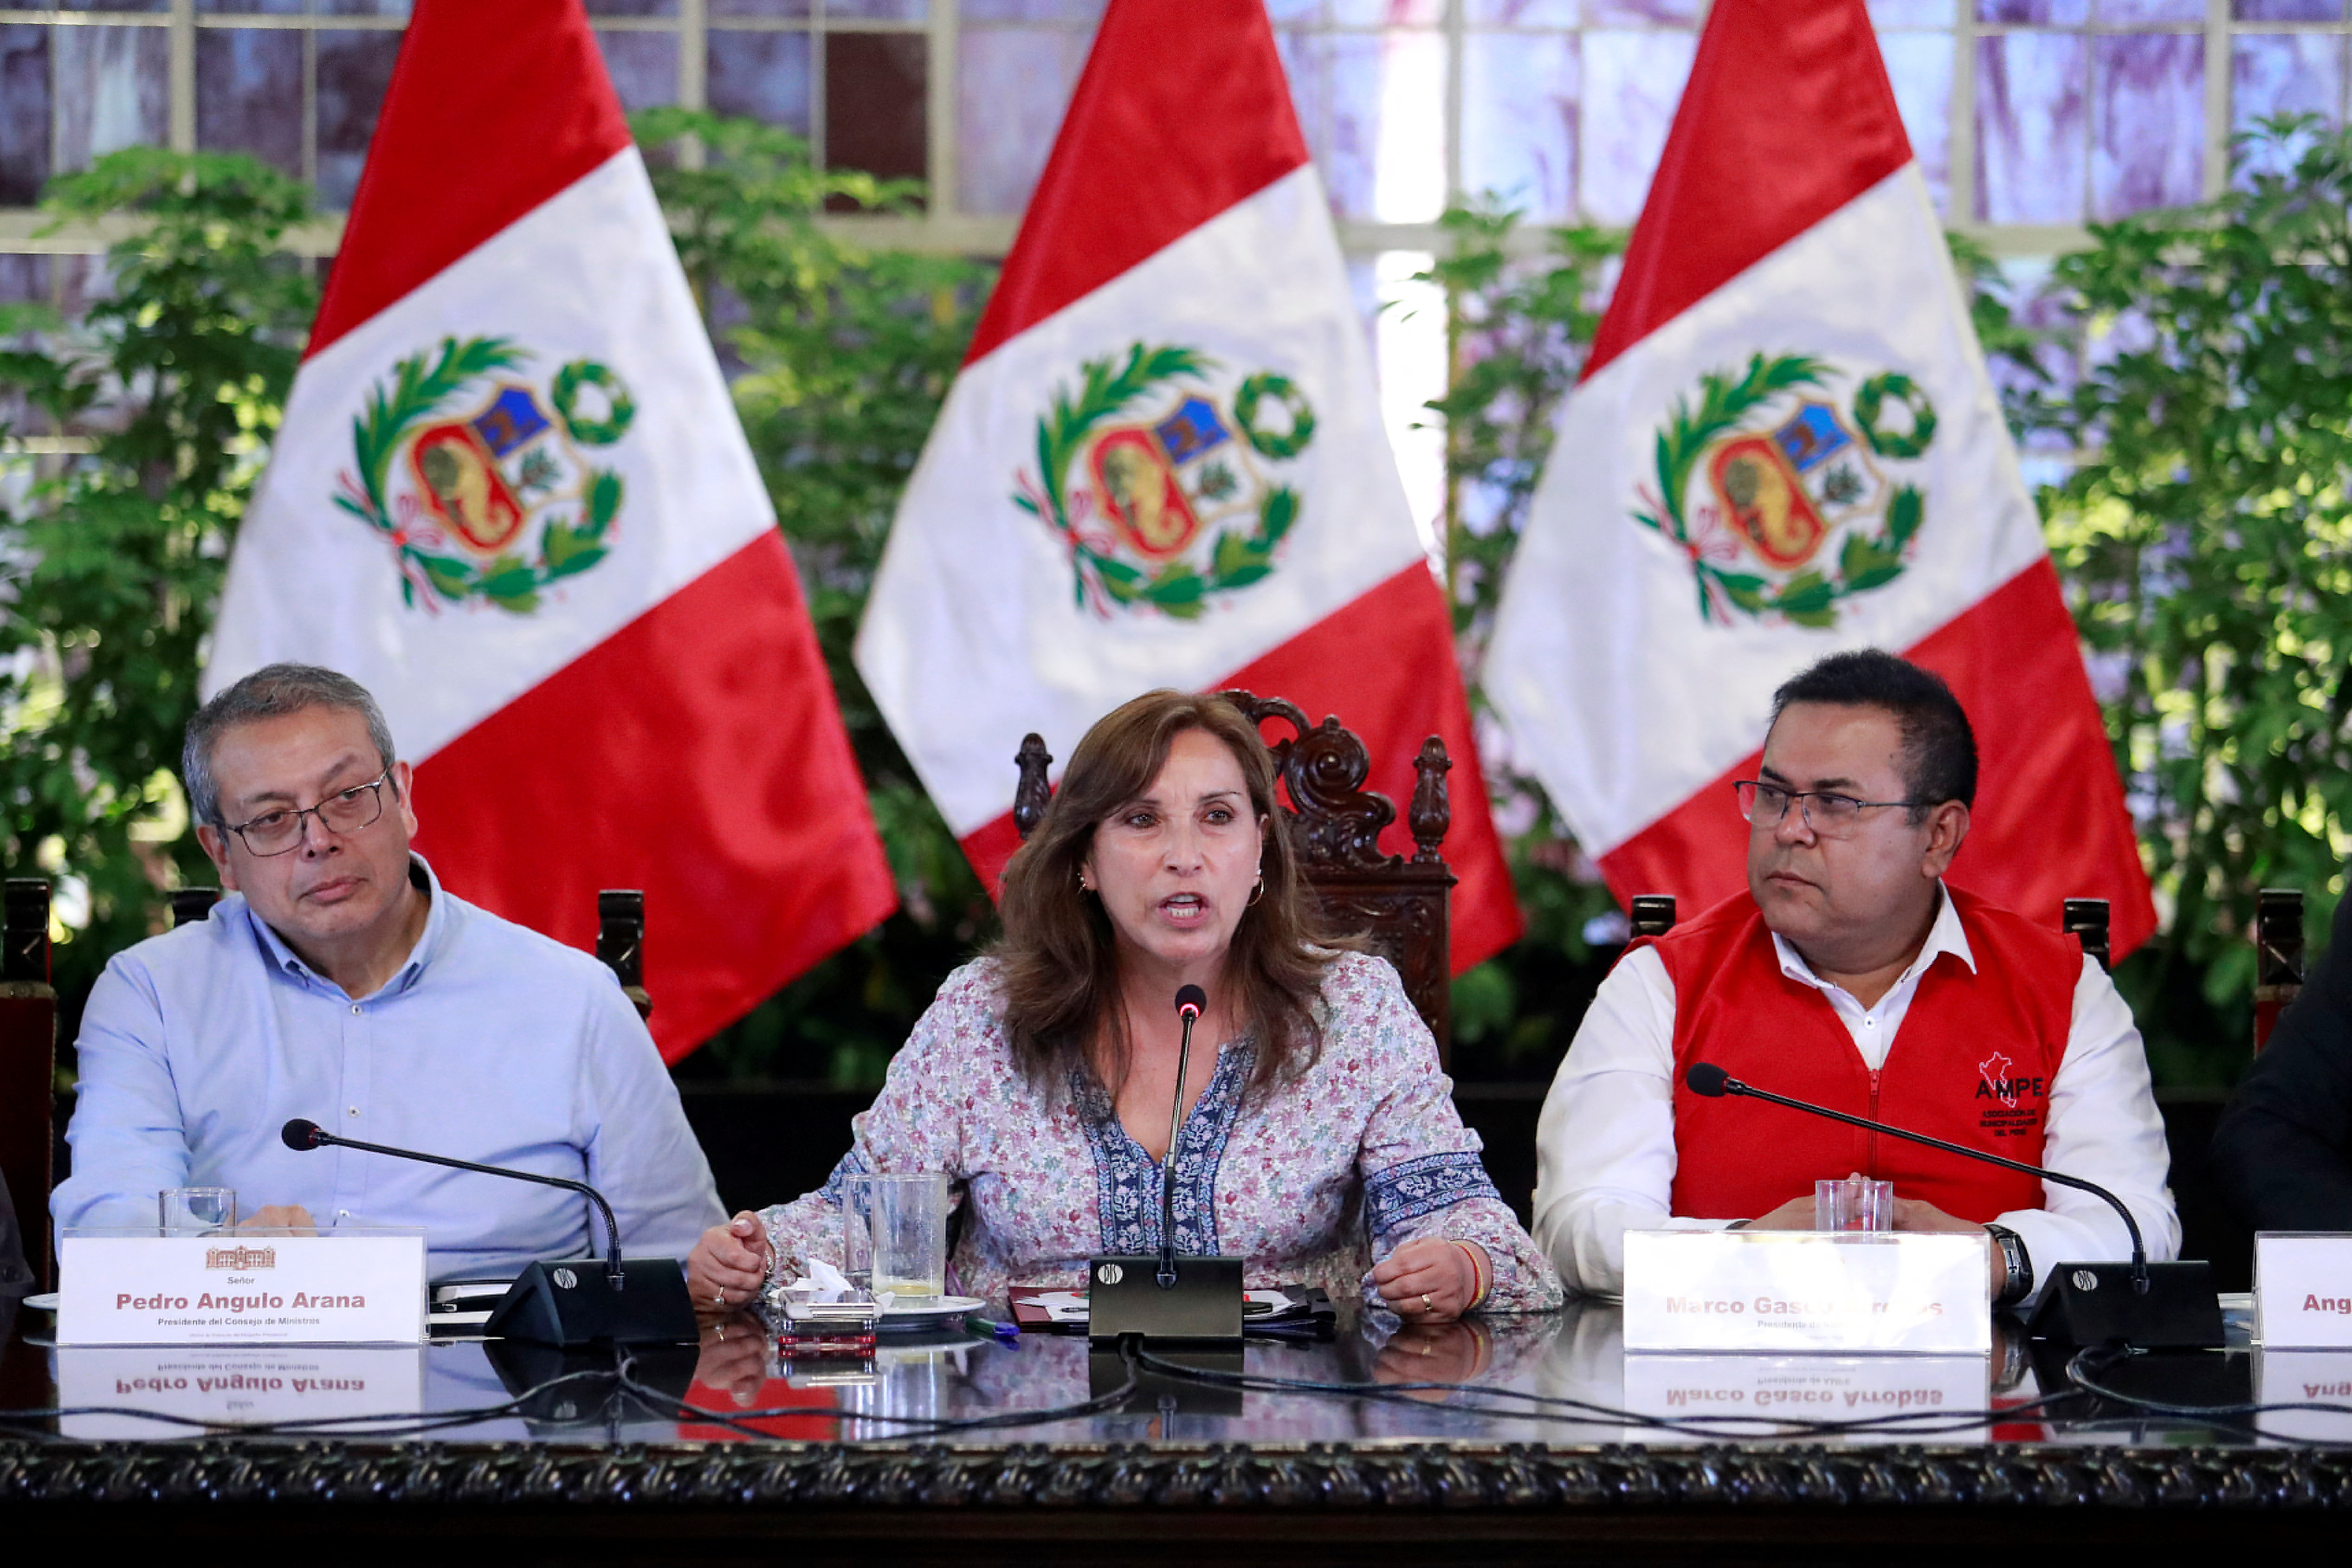 Peru's President Dina Boluarte speaks during a meeting with mayors and governors at the Government Palace, in Lima, Peru December 17, 2022. Peru Presidency/Handout via REUTERS ATTENTION EDITORS - THIS IMAGE WAS PROVIDED BY A THIRD PARTY. NO RESALES. NO ARCHIVES